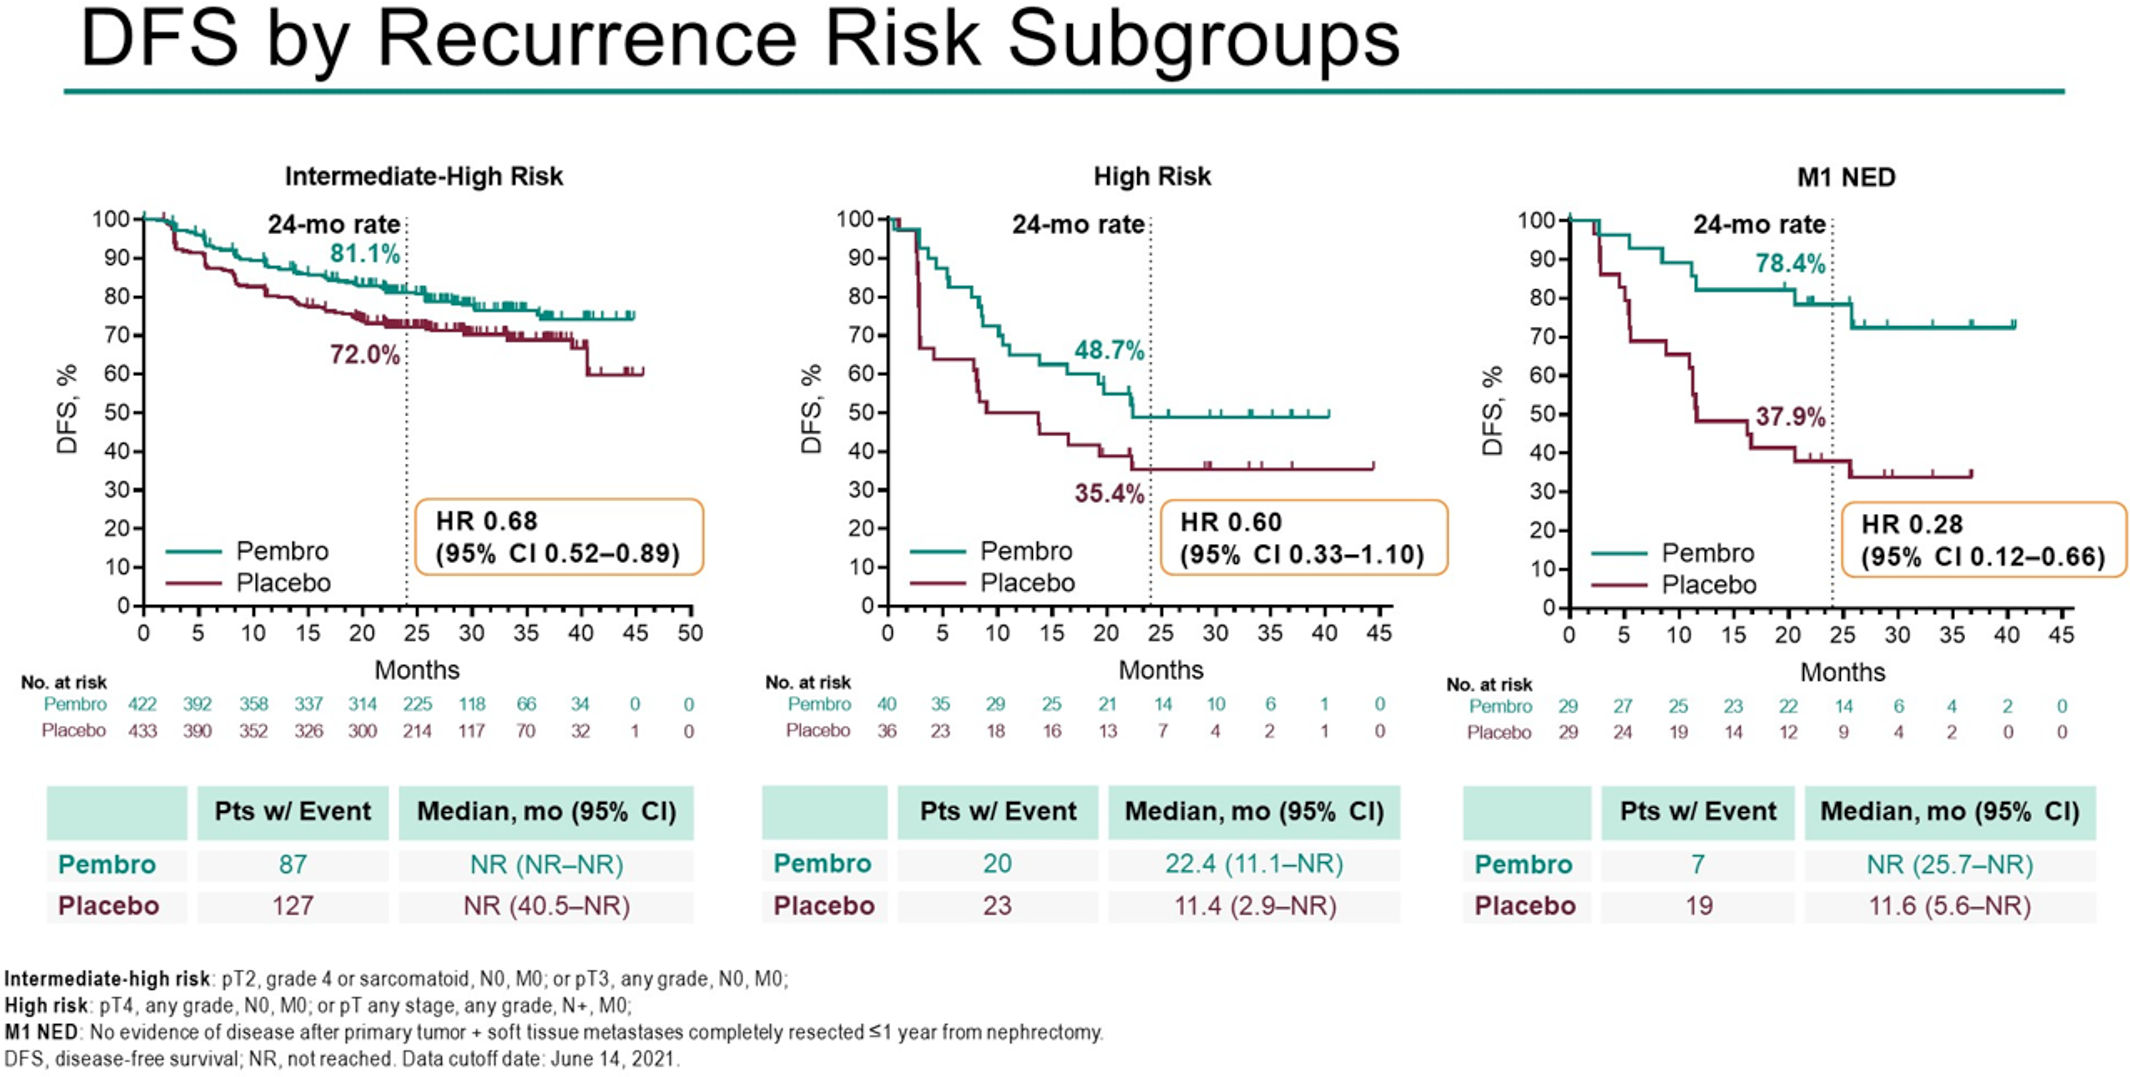 Kaplan-Meier analysis of disease-free survival for patients enrolled in the KEYNOTE-564 trial, according to the recurrence risk subgroups. For the intermediate high–risk group, the number of at-risk patients receiving pembrolizumab at 0, 5, 10, 15, 20, 25, 30, 35, 40, 45, and 50 months was 422, 392, 358, 337, 314, 225, 118, 66, 34, 0, and 0 respectively, while the number of at-risk patients receiving placebo at 0, 5, 10, 15, 20, 25, 30, 35, 40, 45, and 50 months was 433, 390, 352, 326, 300, 214, 117, 70, 32, 1, and 0, respectively. For the high-risk group, the number of at-risk patients treated receiving pembrolizumab at 0, 5, 10, 15, 20, 25, 30, 35, 40, 45, and 50 months was 40, 35, 29, 25, 21, 14, 10, 6, 1, and 0 respectively, while the number of at-risk patients receiving placebo at 0, 5, 10, 15, 20, 25, 30, 35, 40, 45, and 50 months was 36, 23, 18, 16, 13, 7, 4, 2, 1, and 0, respectively. For the M1 NED risk group, the number of at-risk patients treated receiving pembrolizumab at 0, 5, 10, 15, 20, 25, 30, 35, 40, 45, and 50 months was 29, 27, 25, 23, 22, 14, 6, 4, 2, and 0 respectively, while the number of at-risk patients receiving placebo at 0, 5, 10, 15, 20, 25, 30, 35, 40, 45, and 50 months was 29, 24, 19, 14, 12, 9, 4, 2, 0, and 0, respectively.